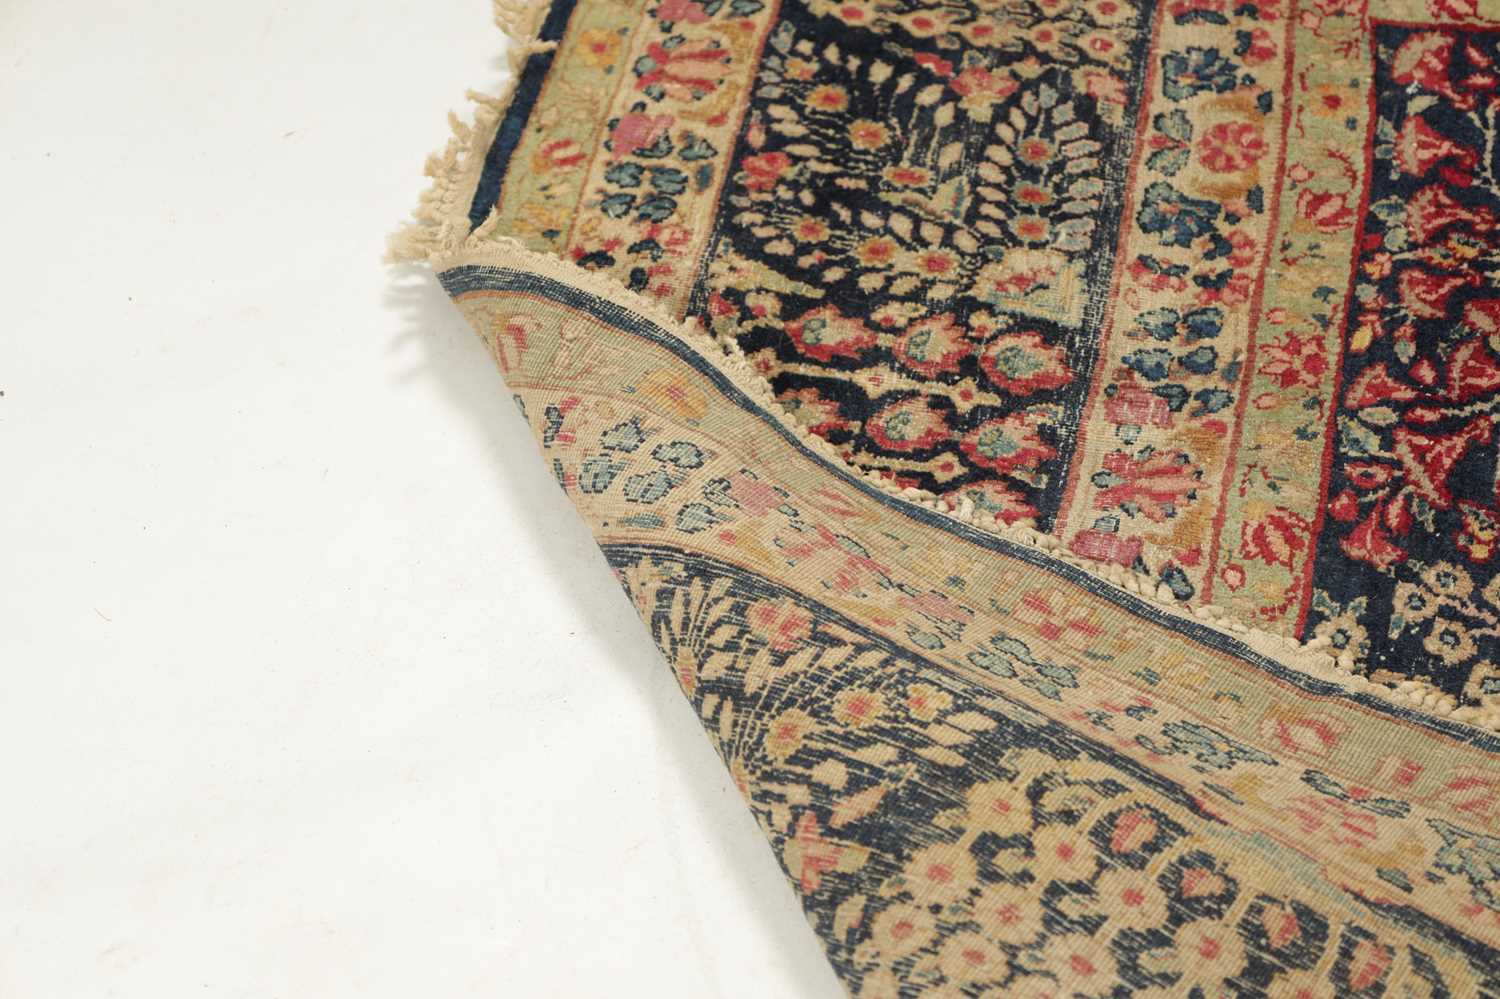 A LARGE ANTIQUE TABRIZ PERSIAN RUG - Image 5 of 9